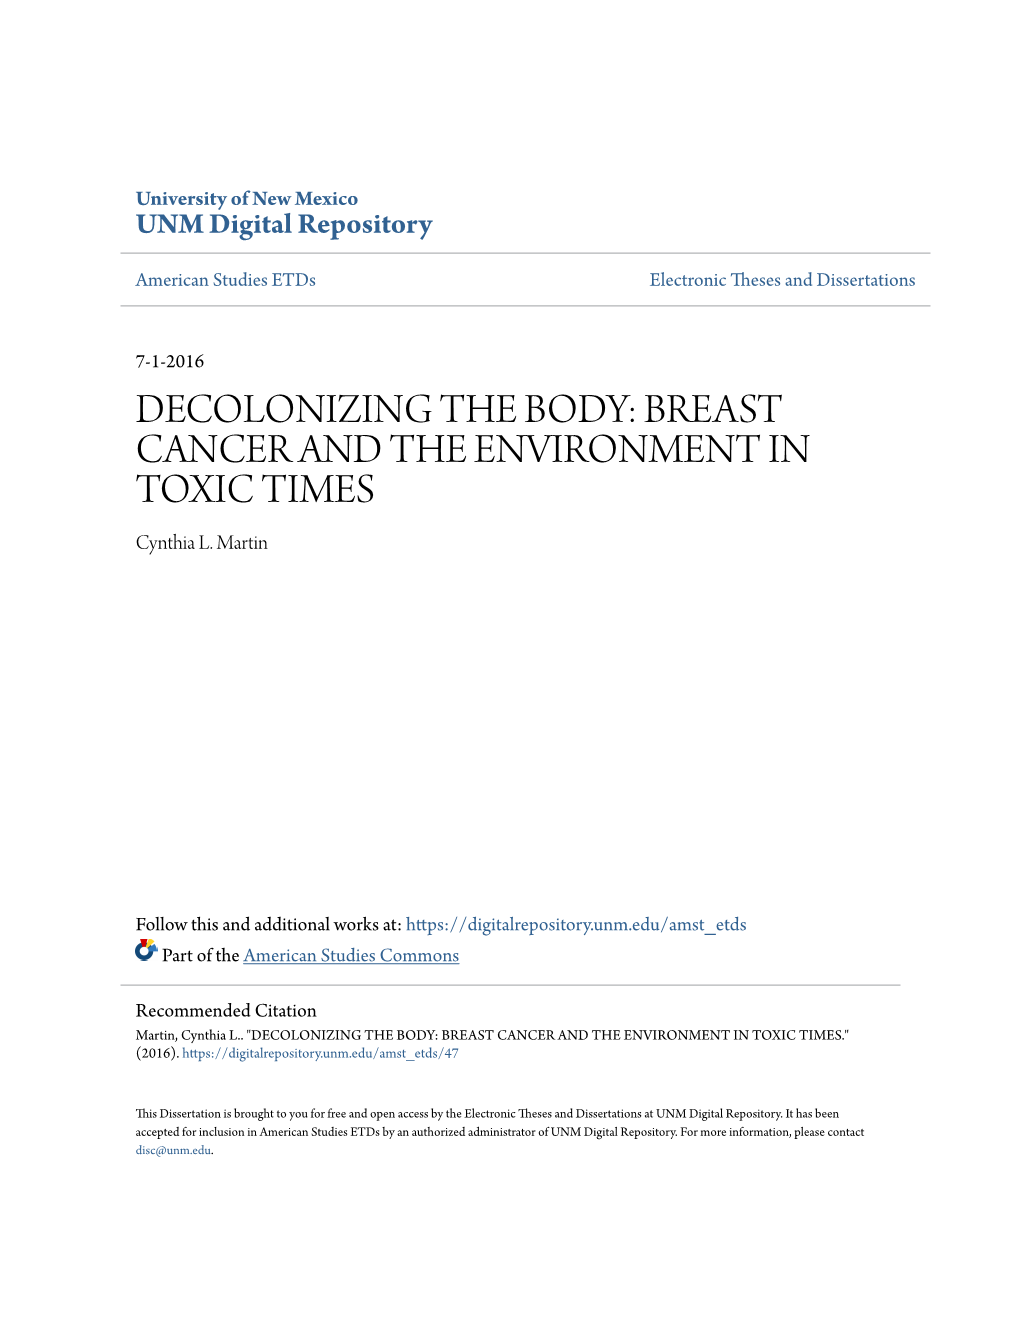 DECOLONIZING the BODY: BREAST CANCER and the ENVIRONMENT in TOXIC TIMES Cynthia L